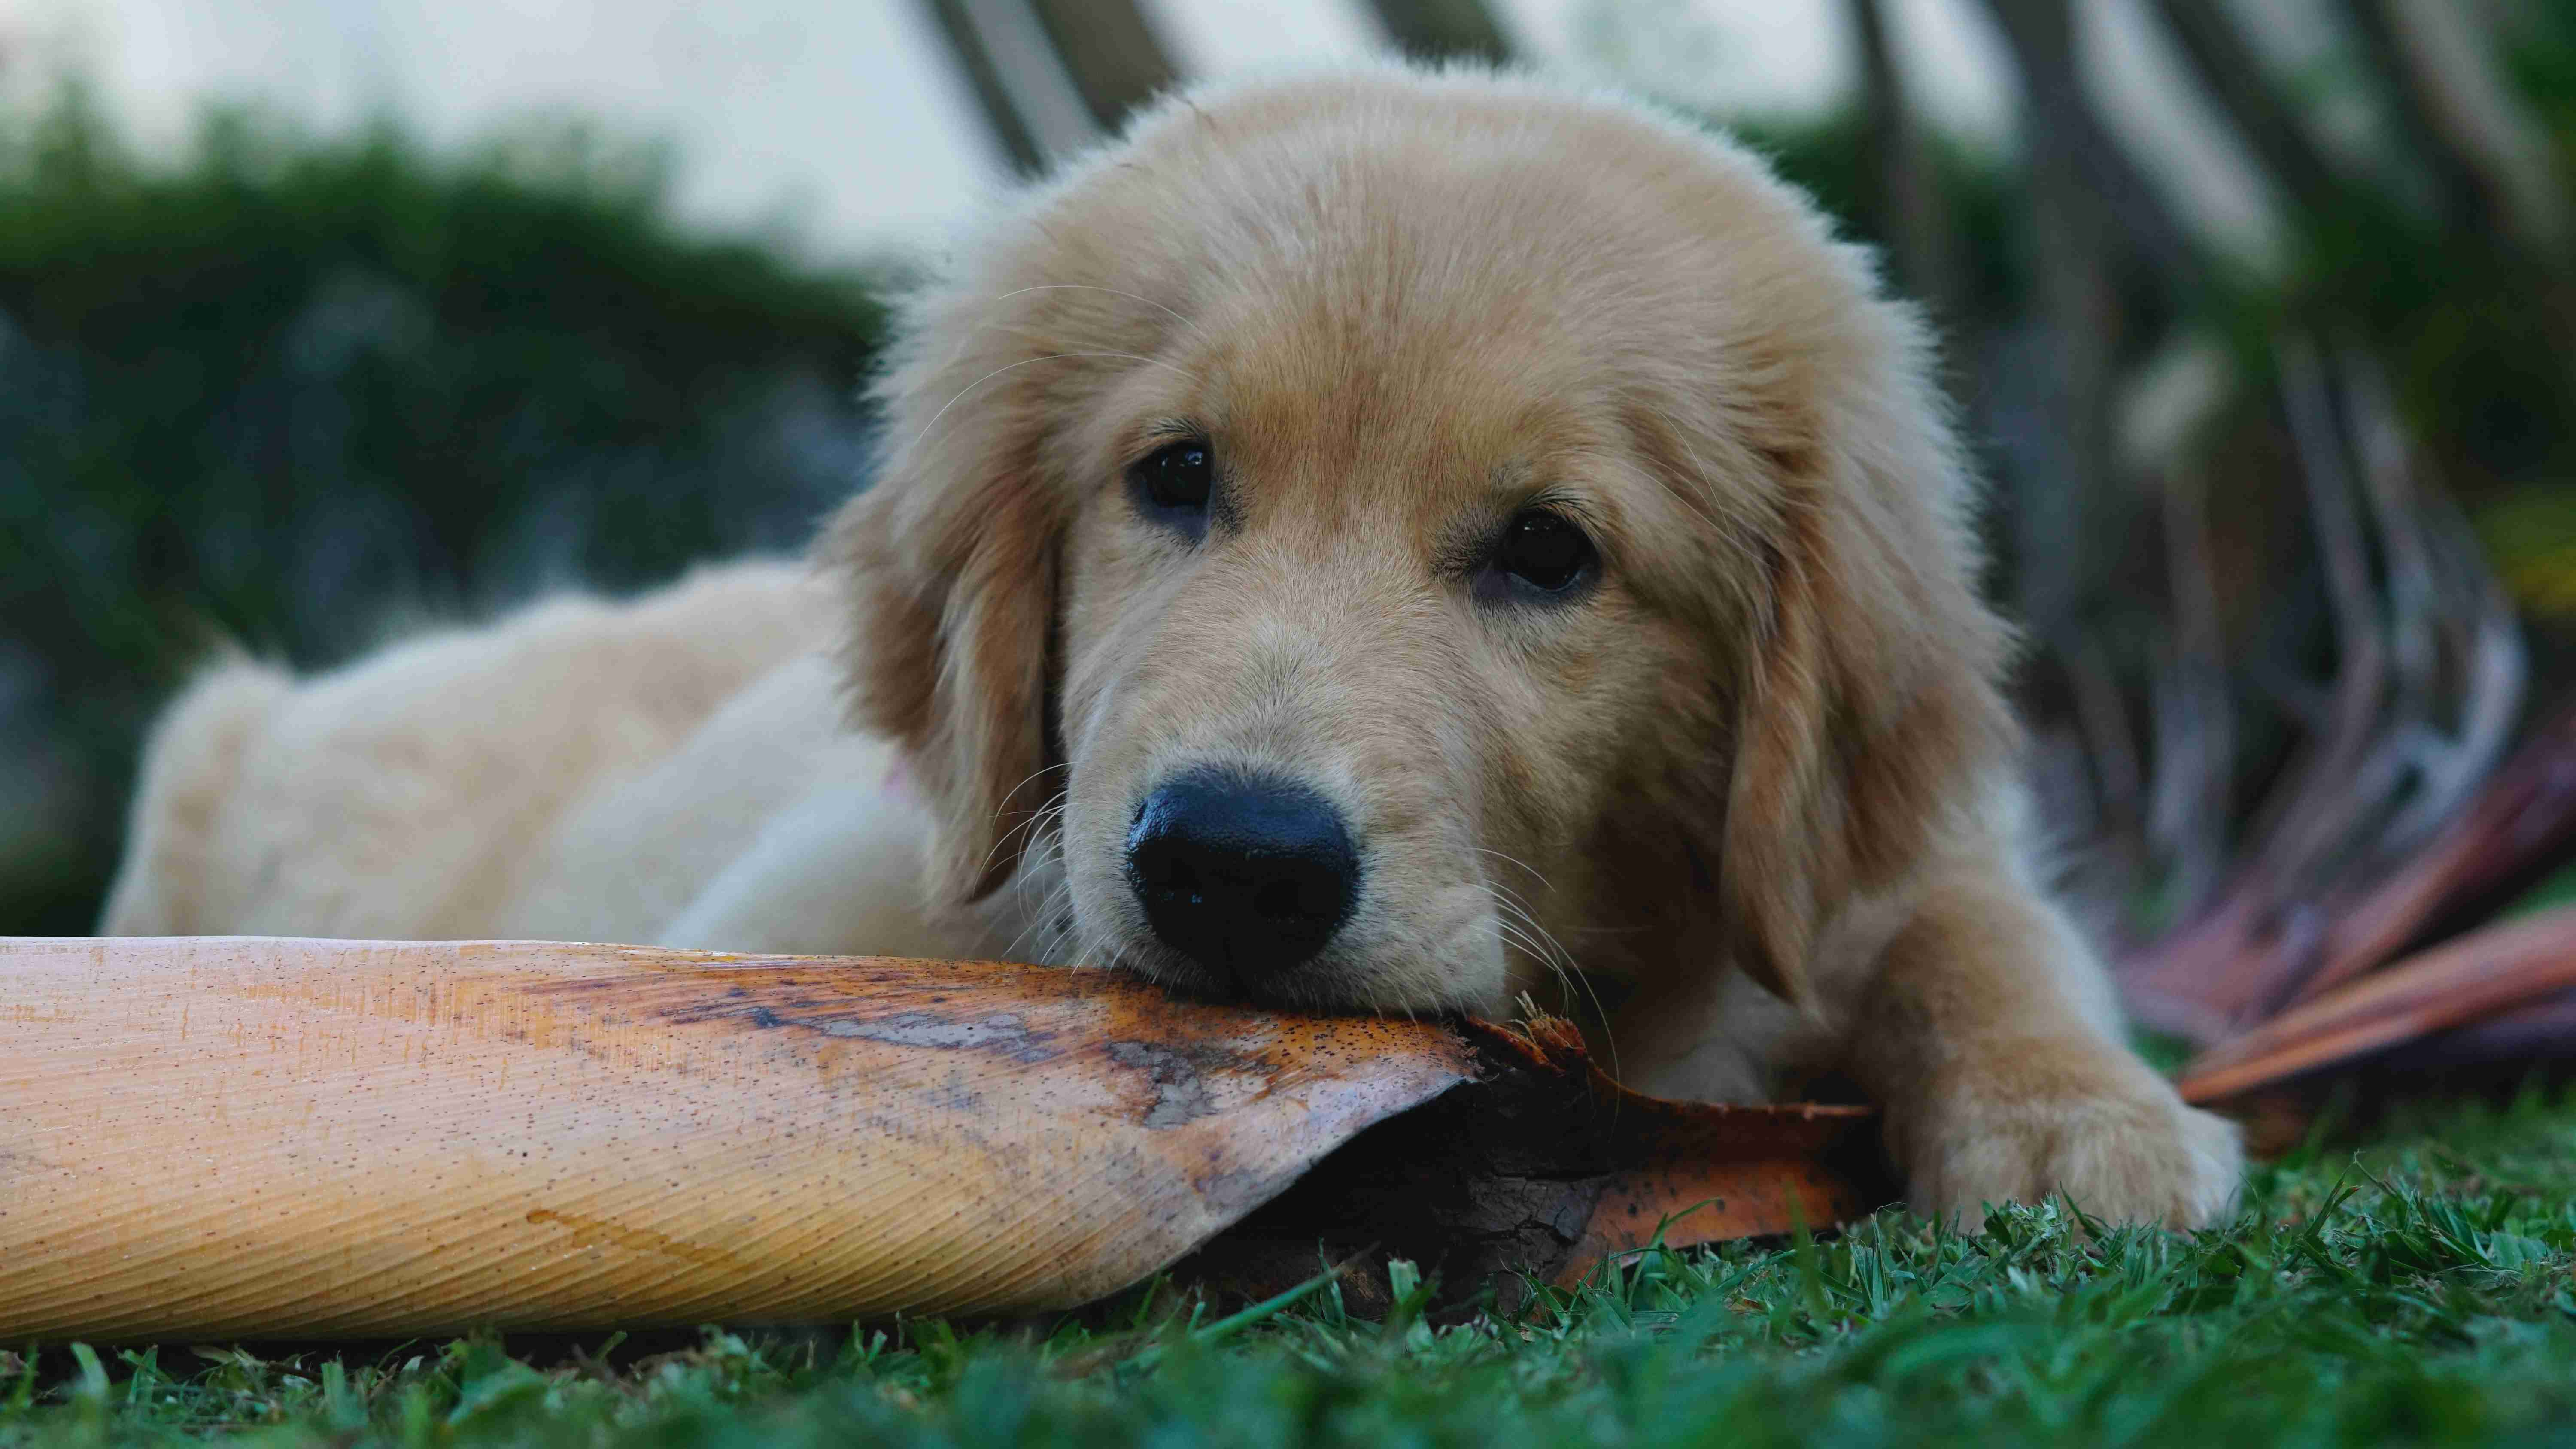 Top Tips for Keeping Your Golden Retriever's Bones Healthy and Strong